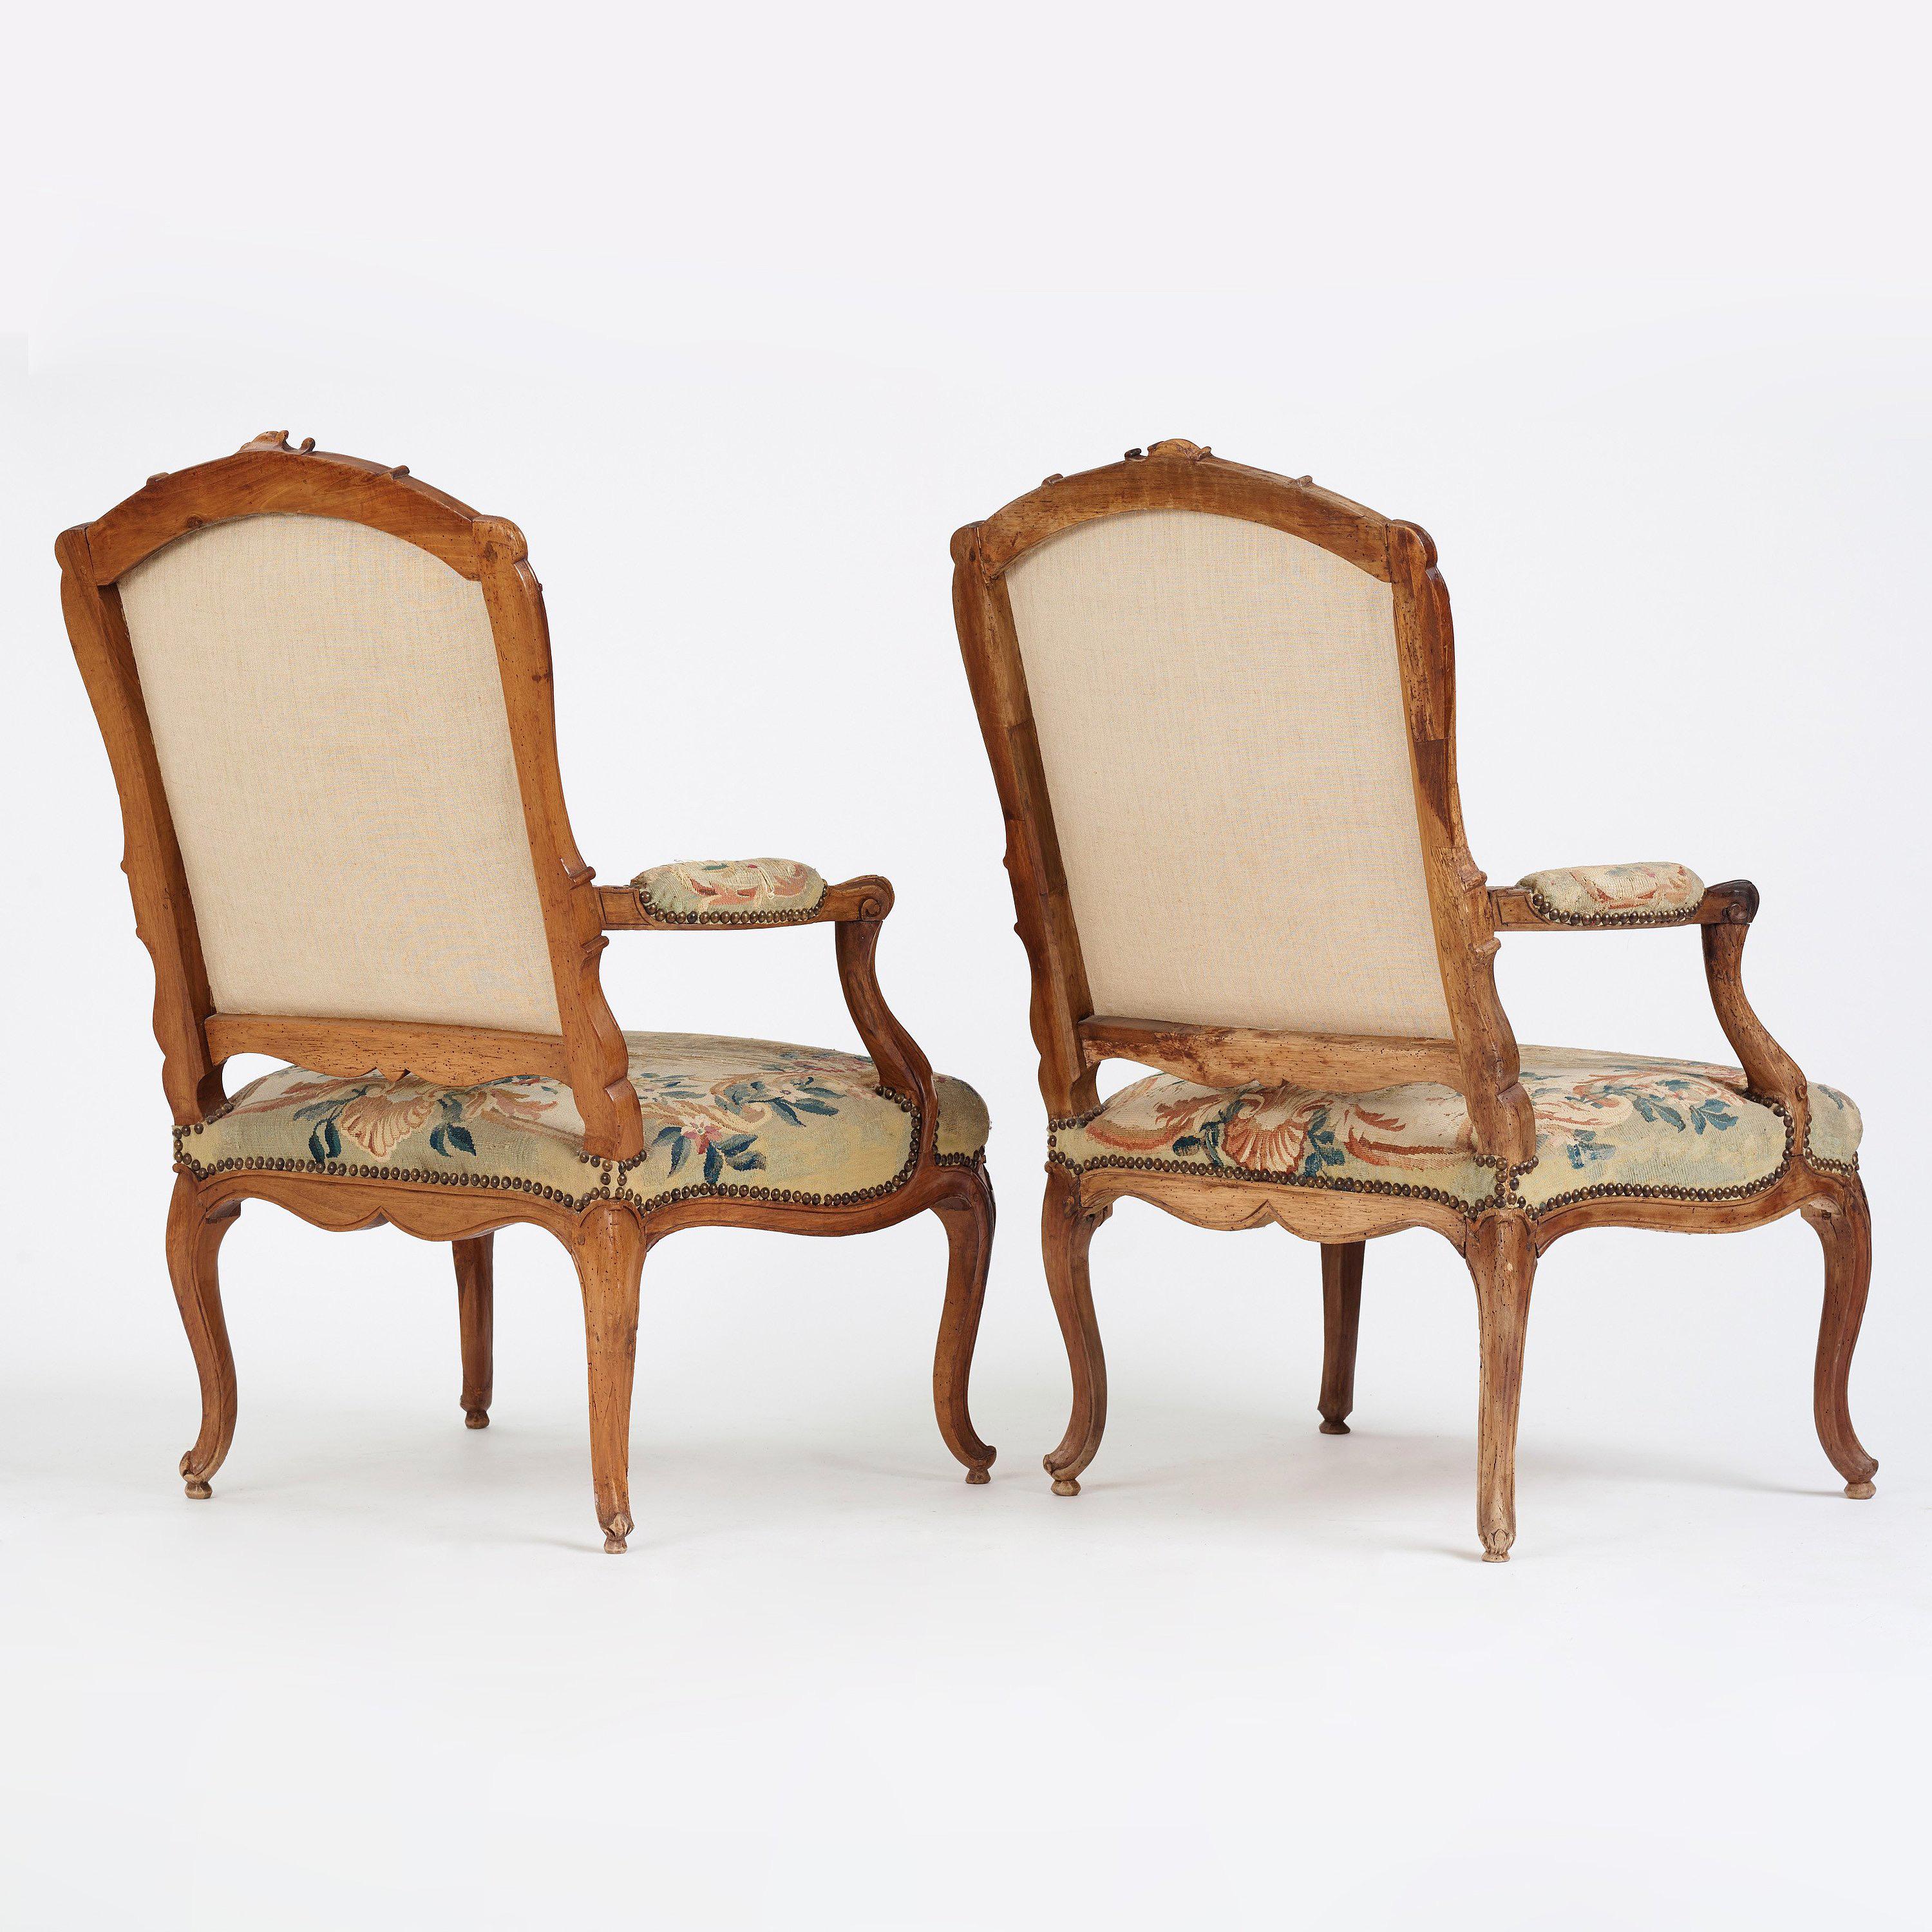 Carved Pair of French 18th Century Louis XV Armchairs with Aubusson Tapestry